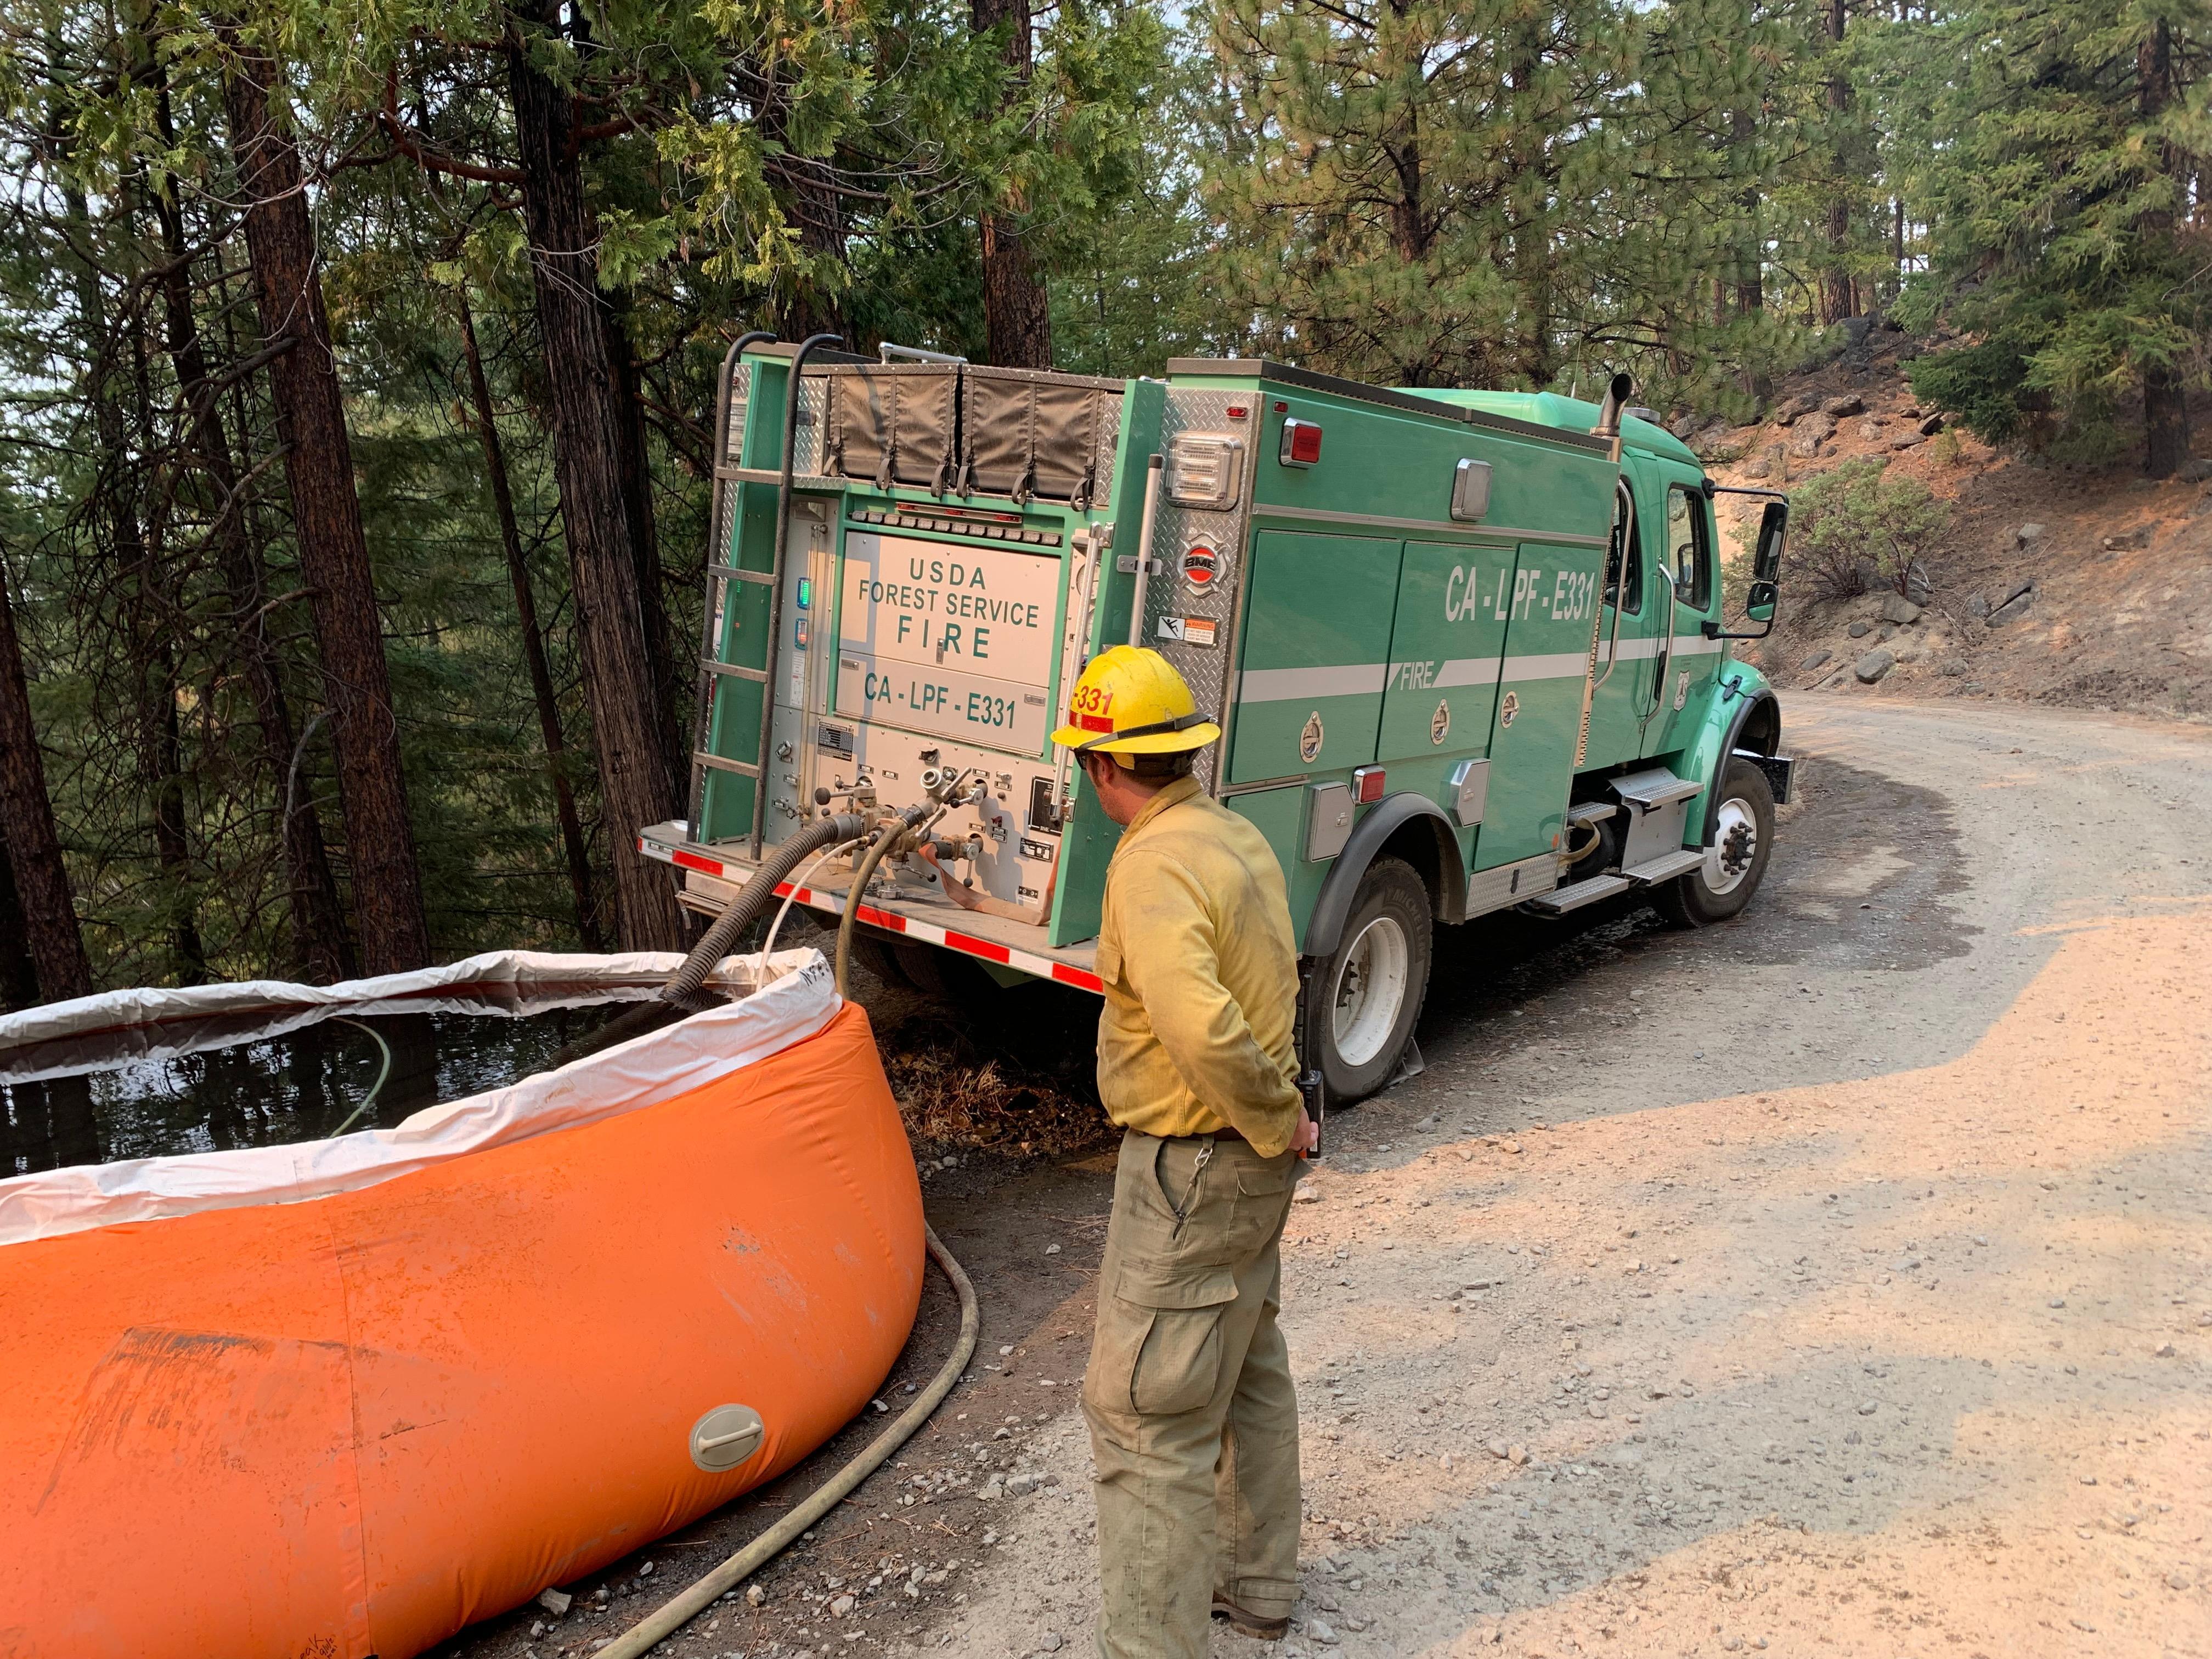 A firefighter looks at a water container and a fire engine on a forested, dirt road. 